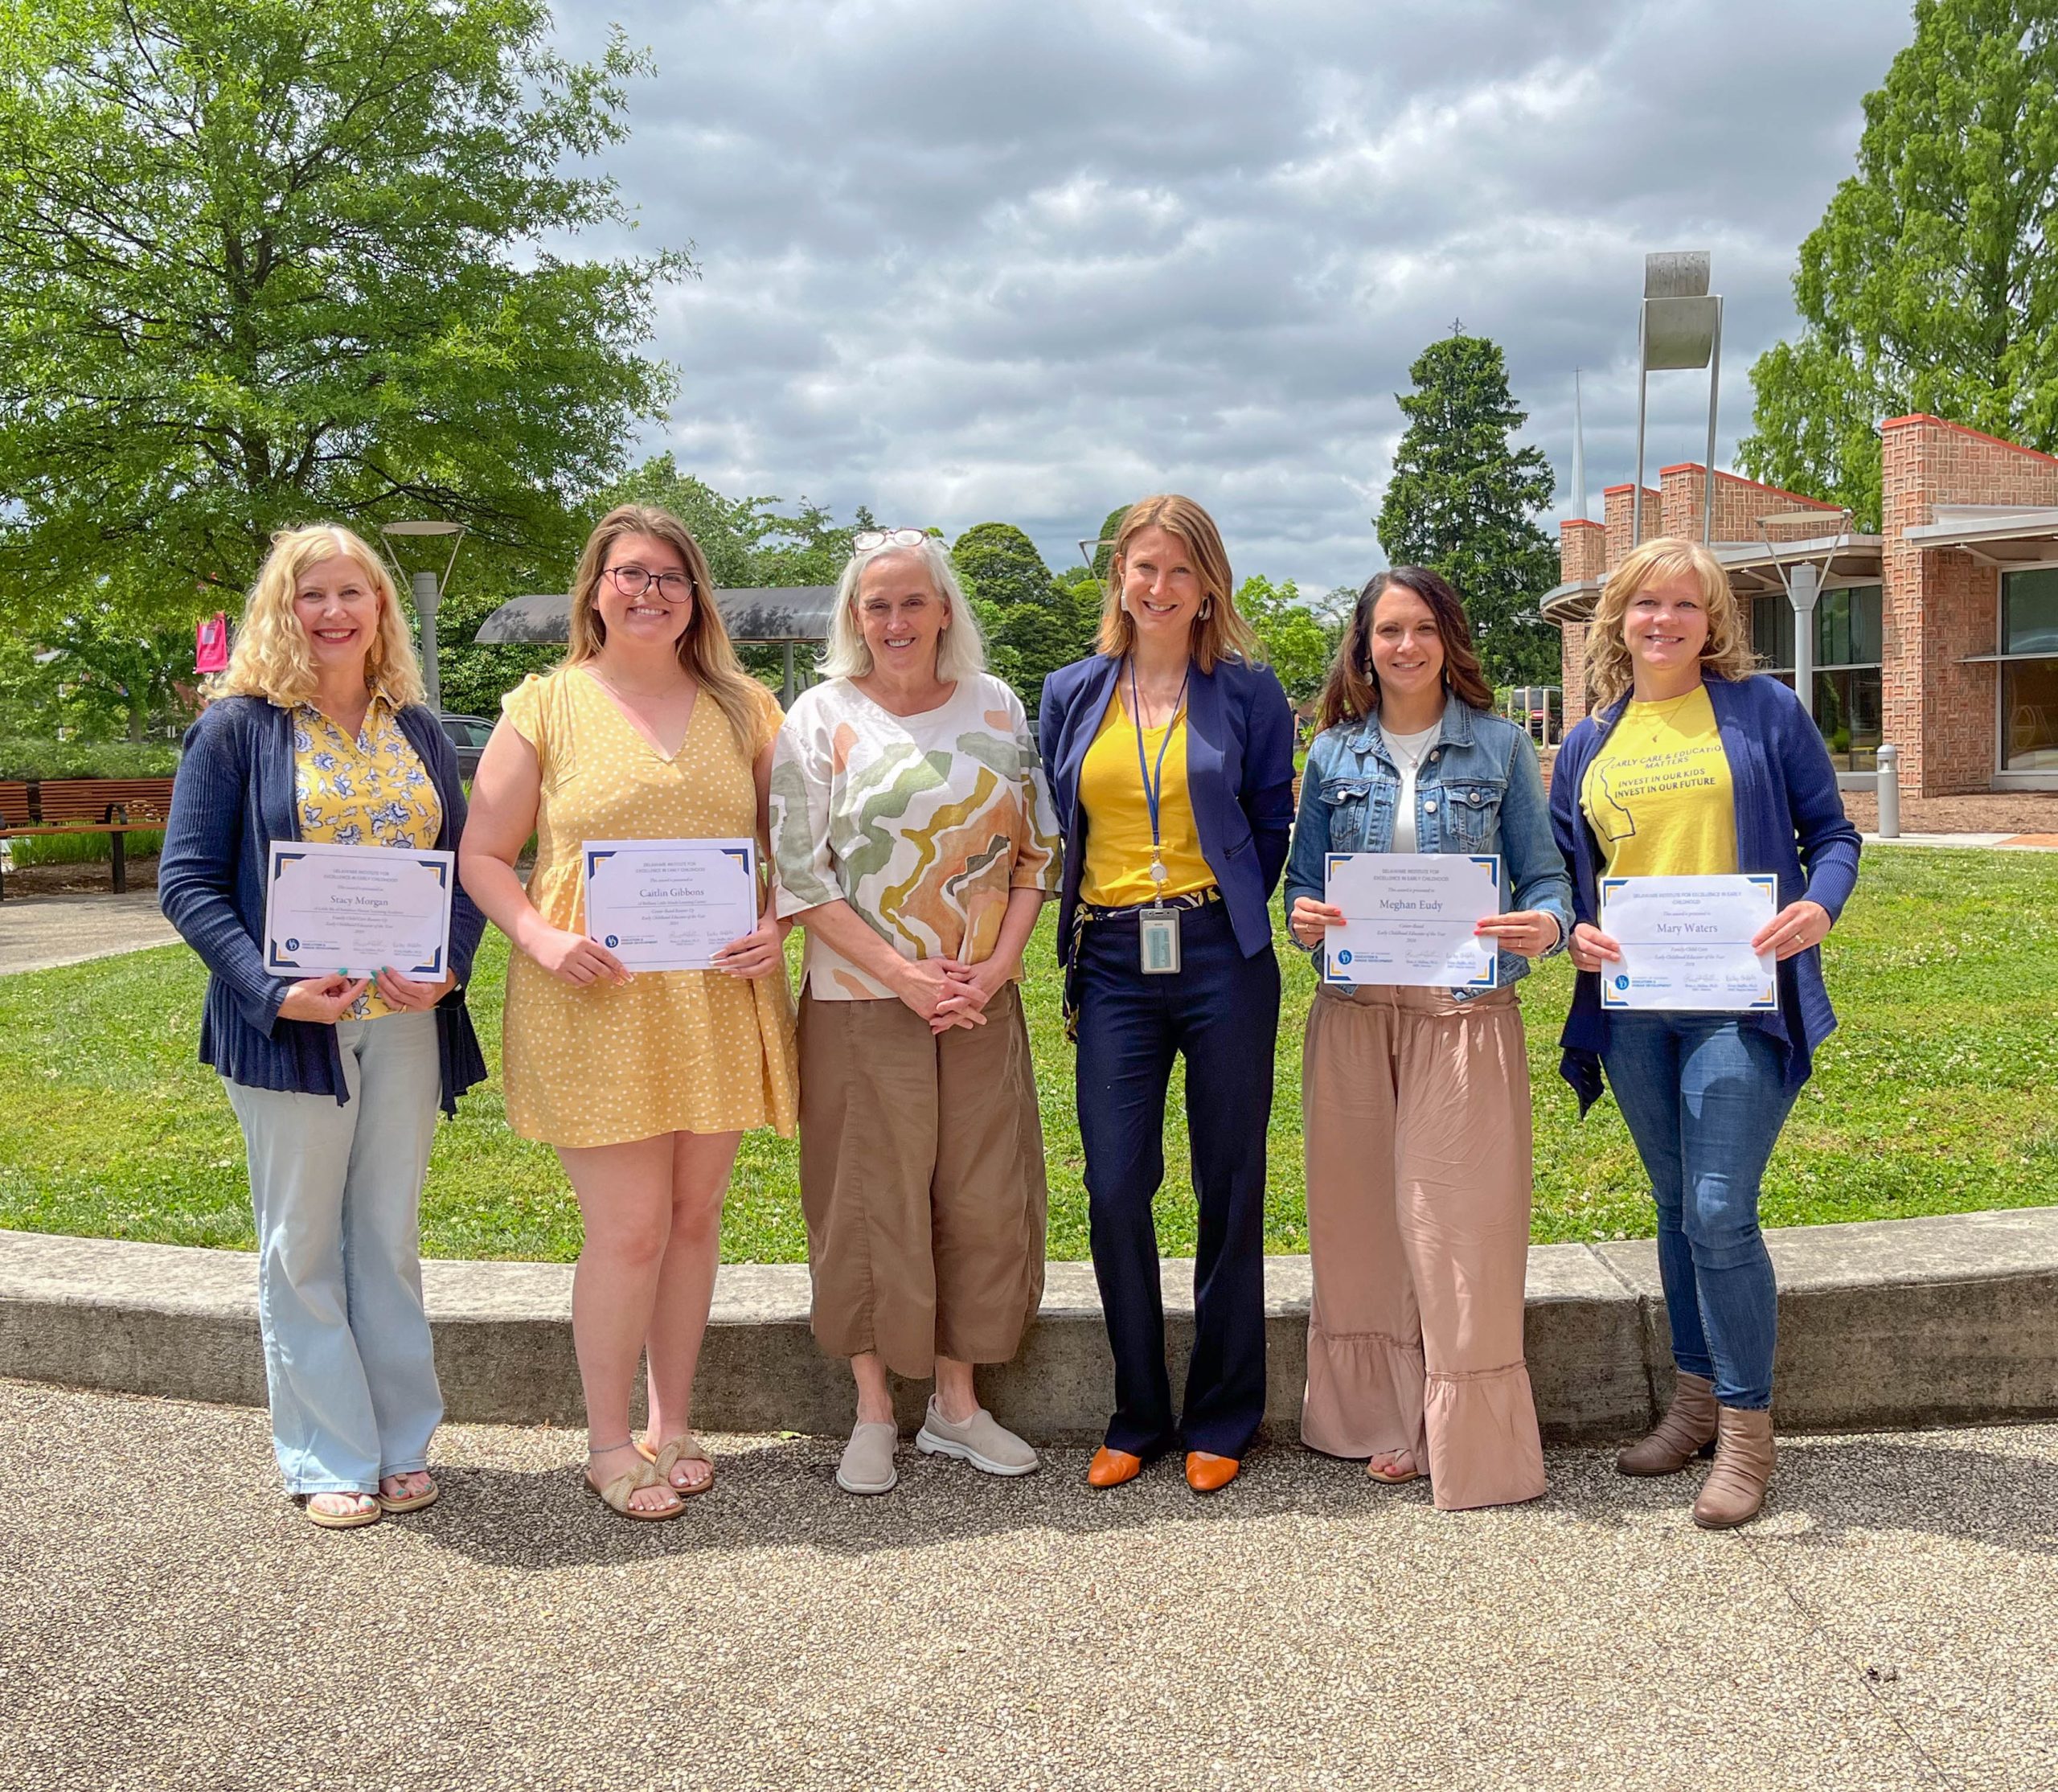 Pictured are our winners: Mary Walters, Meghan Eudy, runners-up: Stacy Morgan, Caitlin Gibbons, First Spouse: Tracey Quillen Carney, and Associate Secretary, Early Childhood Support, Delaware Department of Education: Caitlin Gleason.